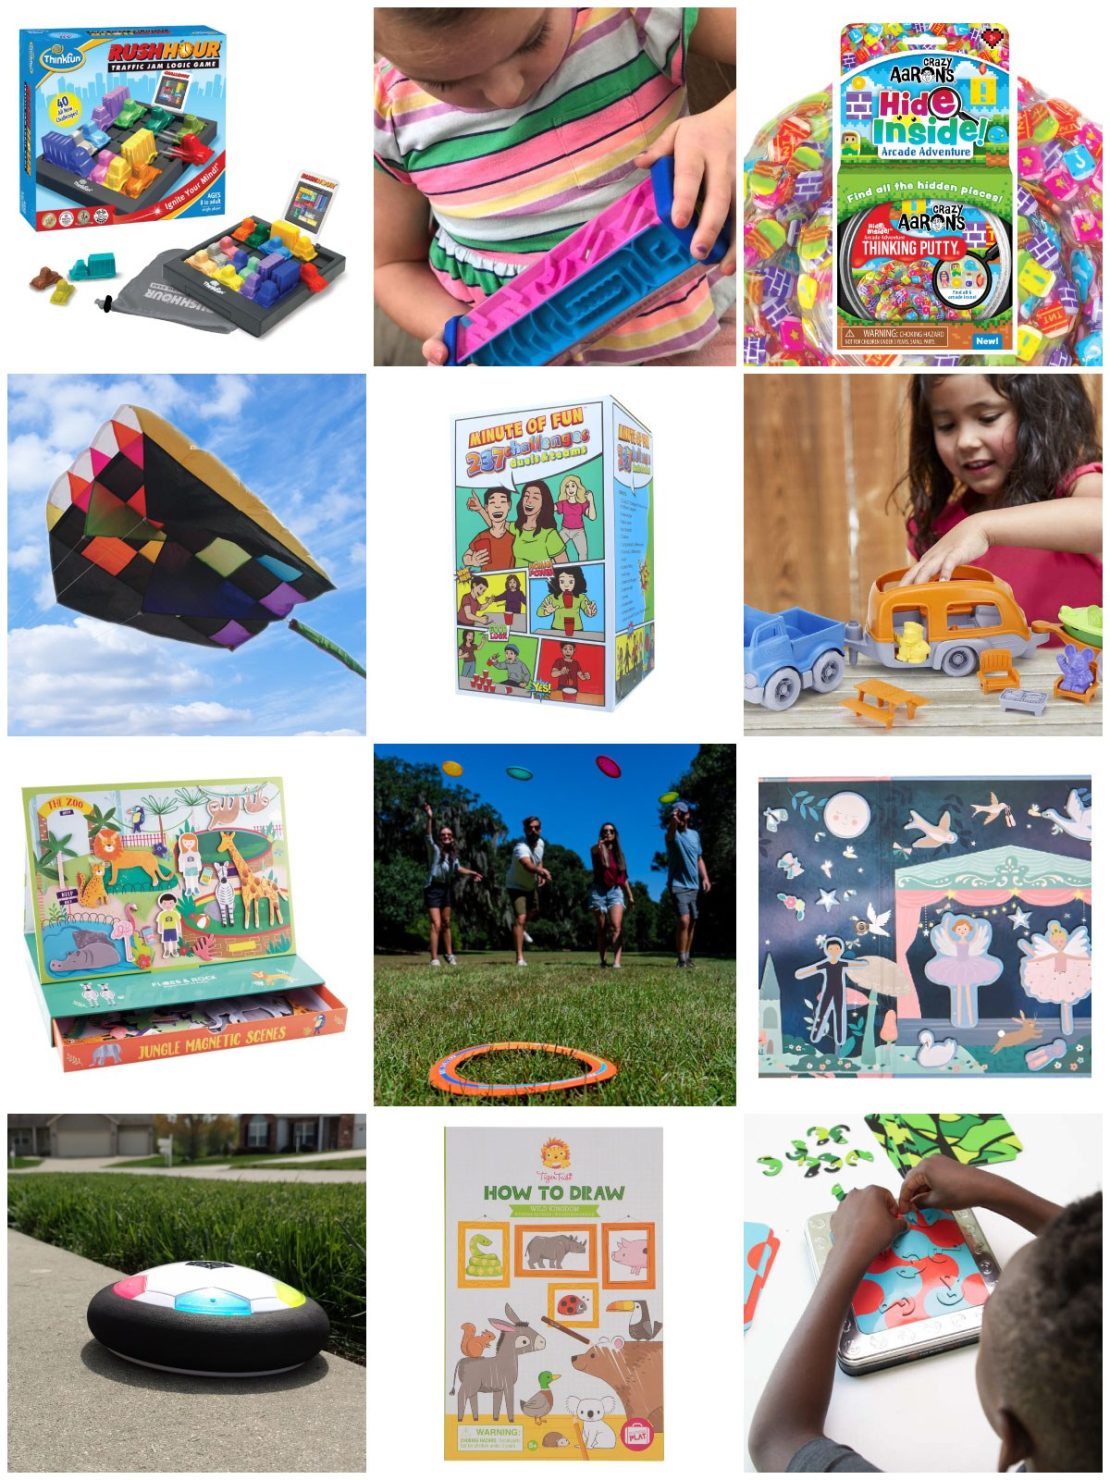 Magnetic playsets, logic games, outdoorsy fun that packs up small, and so much more!